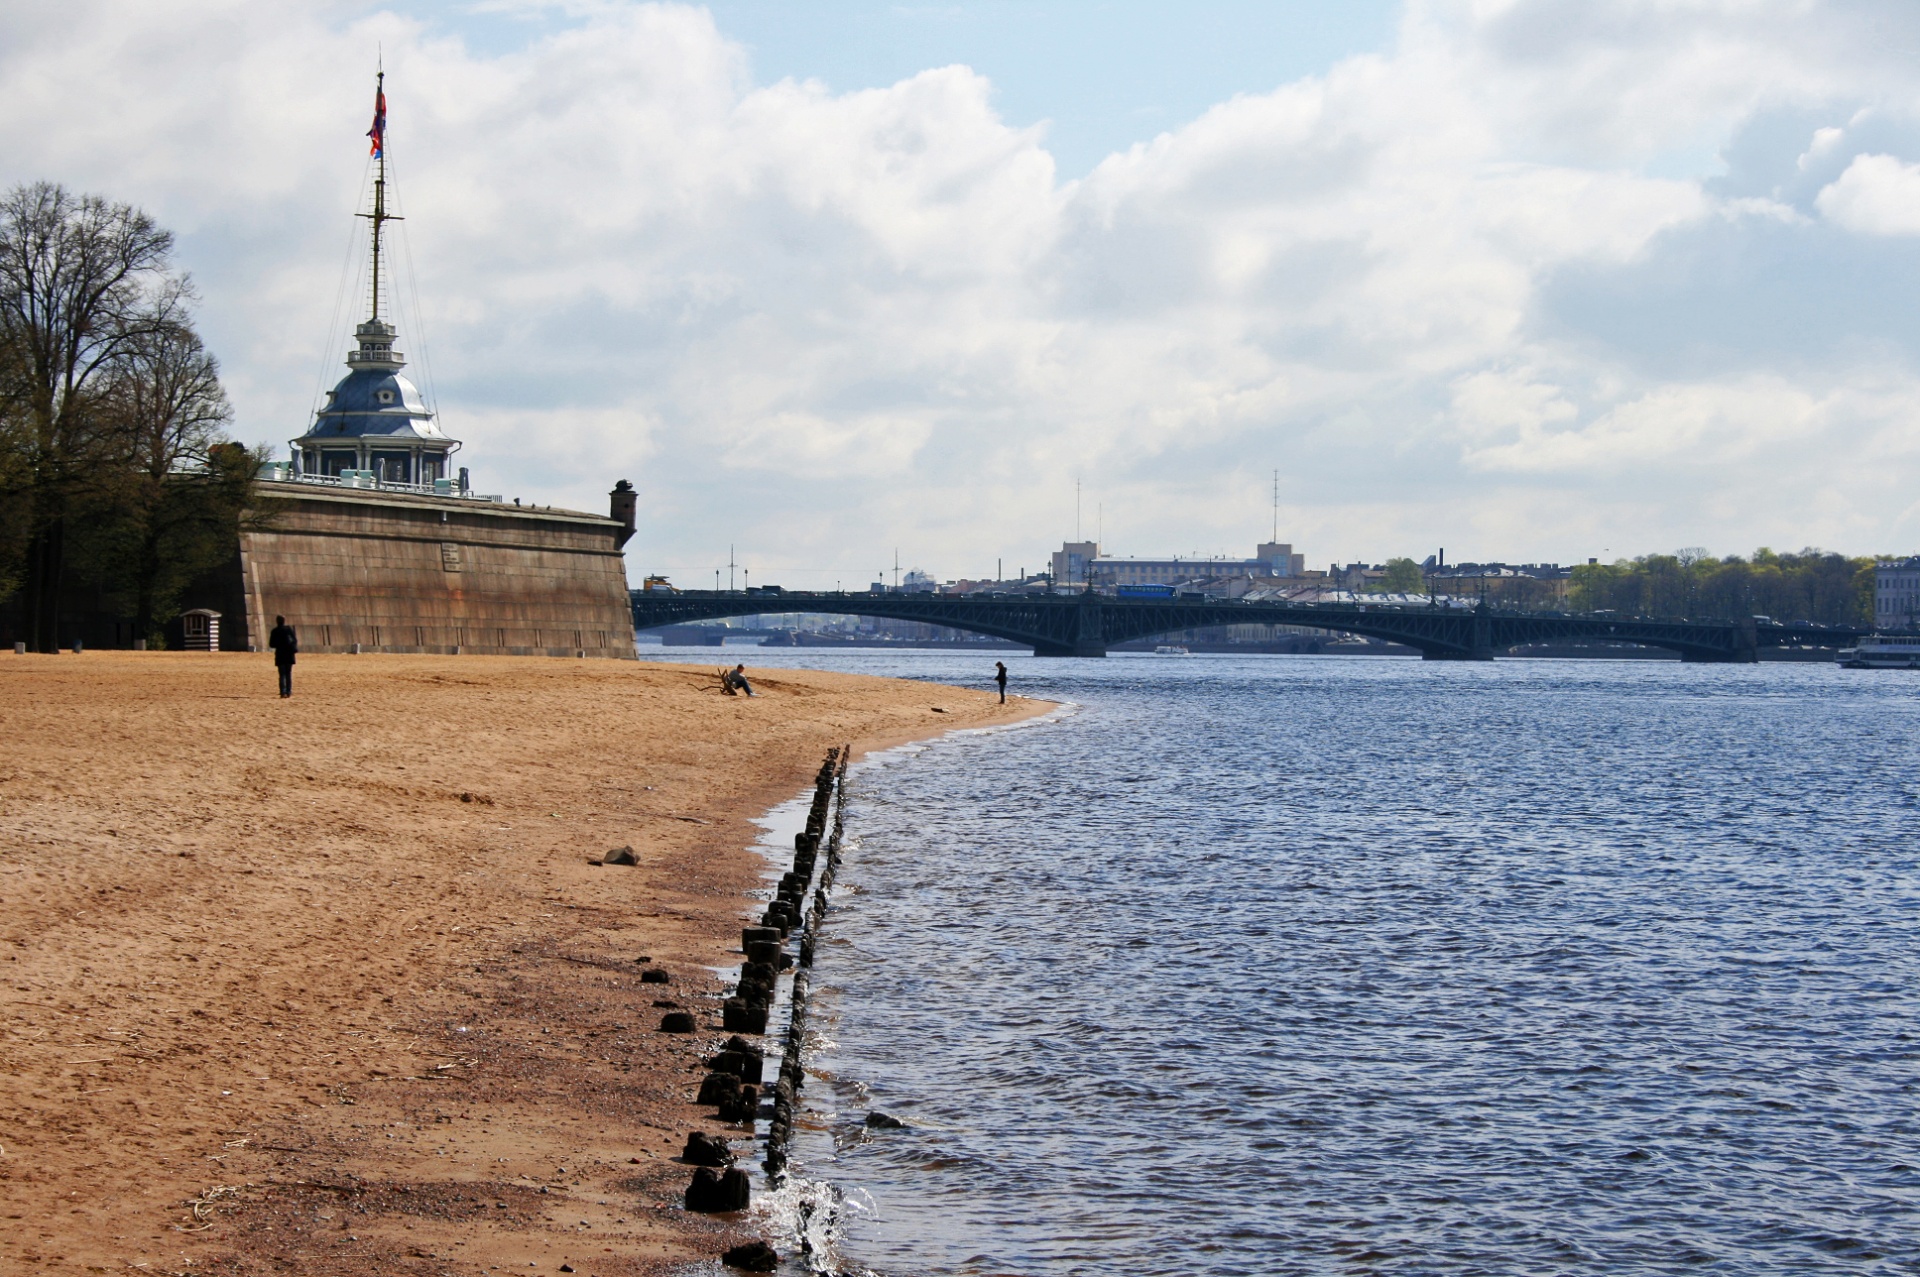 Beach Of The Peter & Paul Fortress